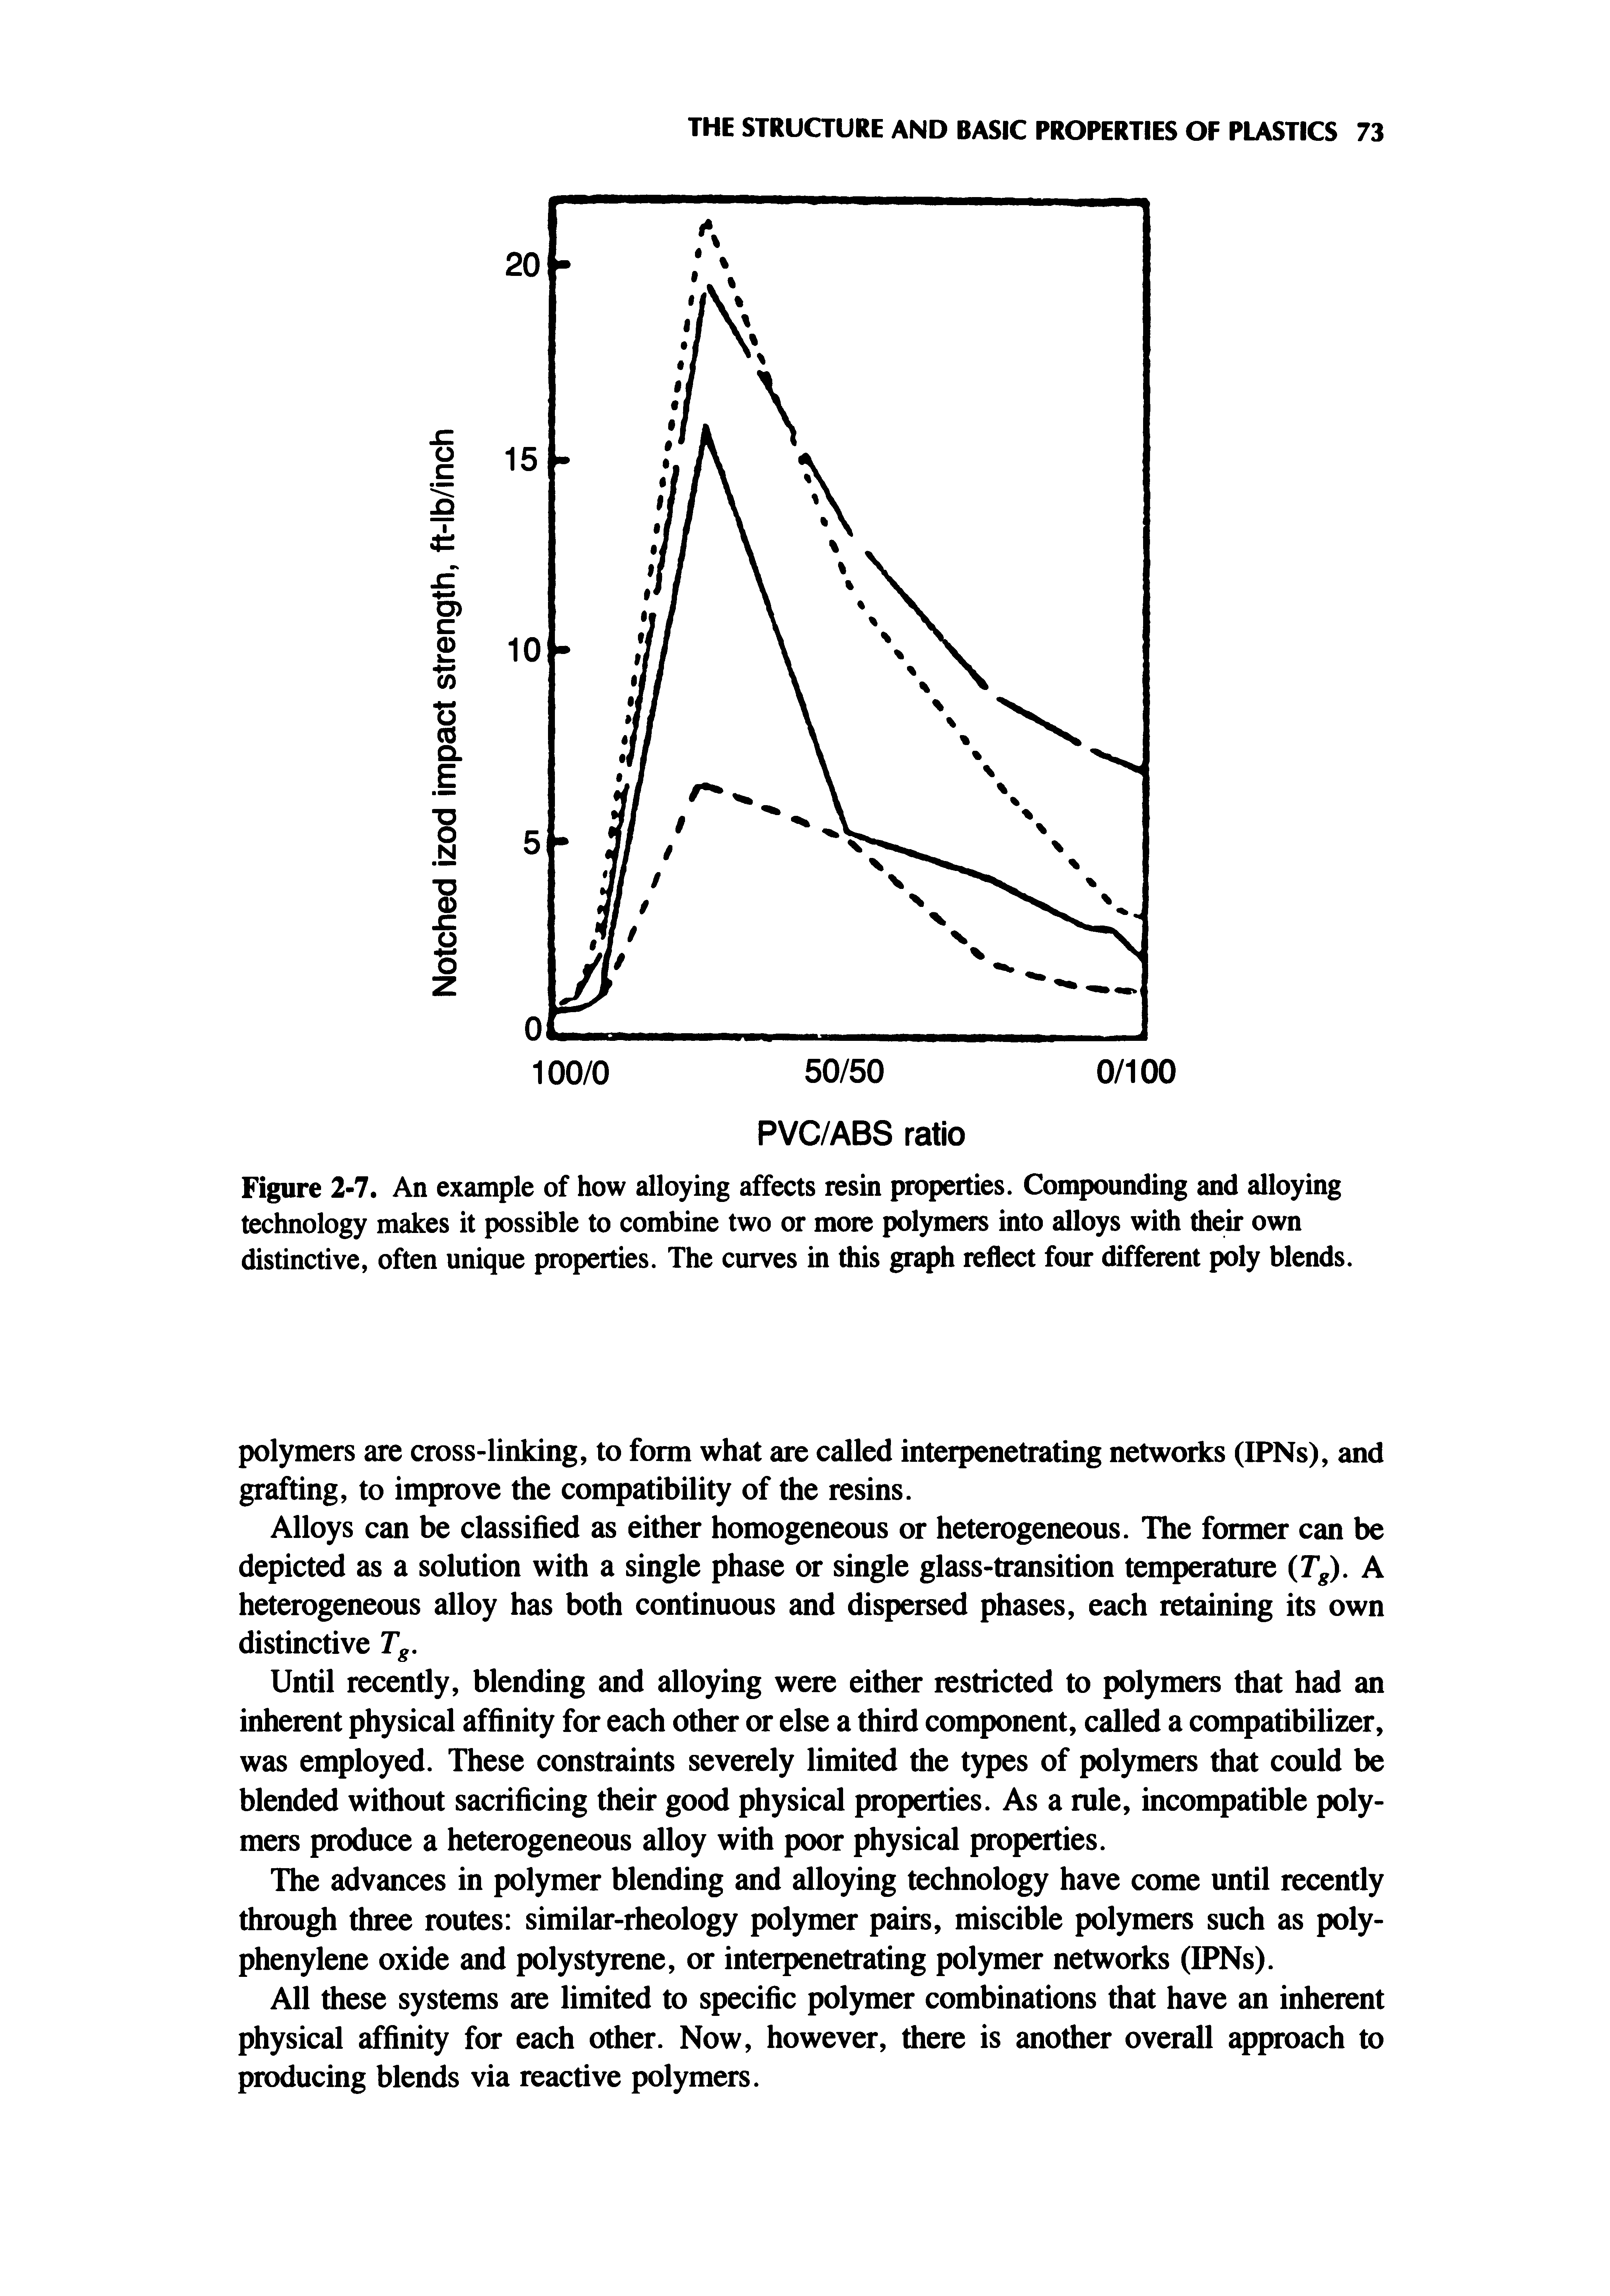 Figure 2 7. An example of how alloying affects resin properties. Compounding and alloying technology makes it possible to combine two or more polymers into alloys with their own distinctive, often unique properties. The curves in this graph reflect four different poly blends.